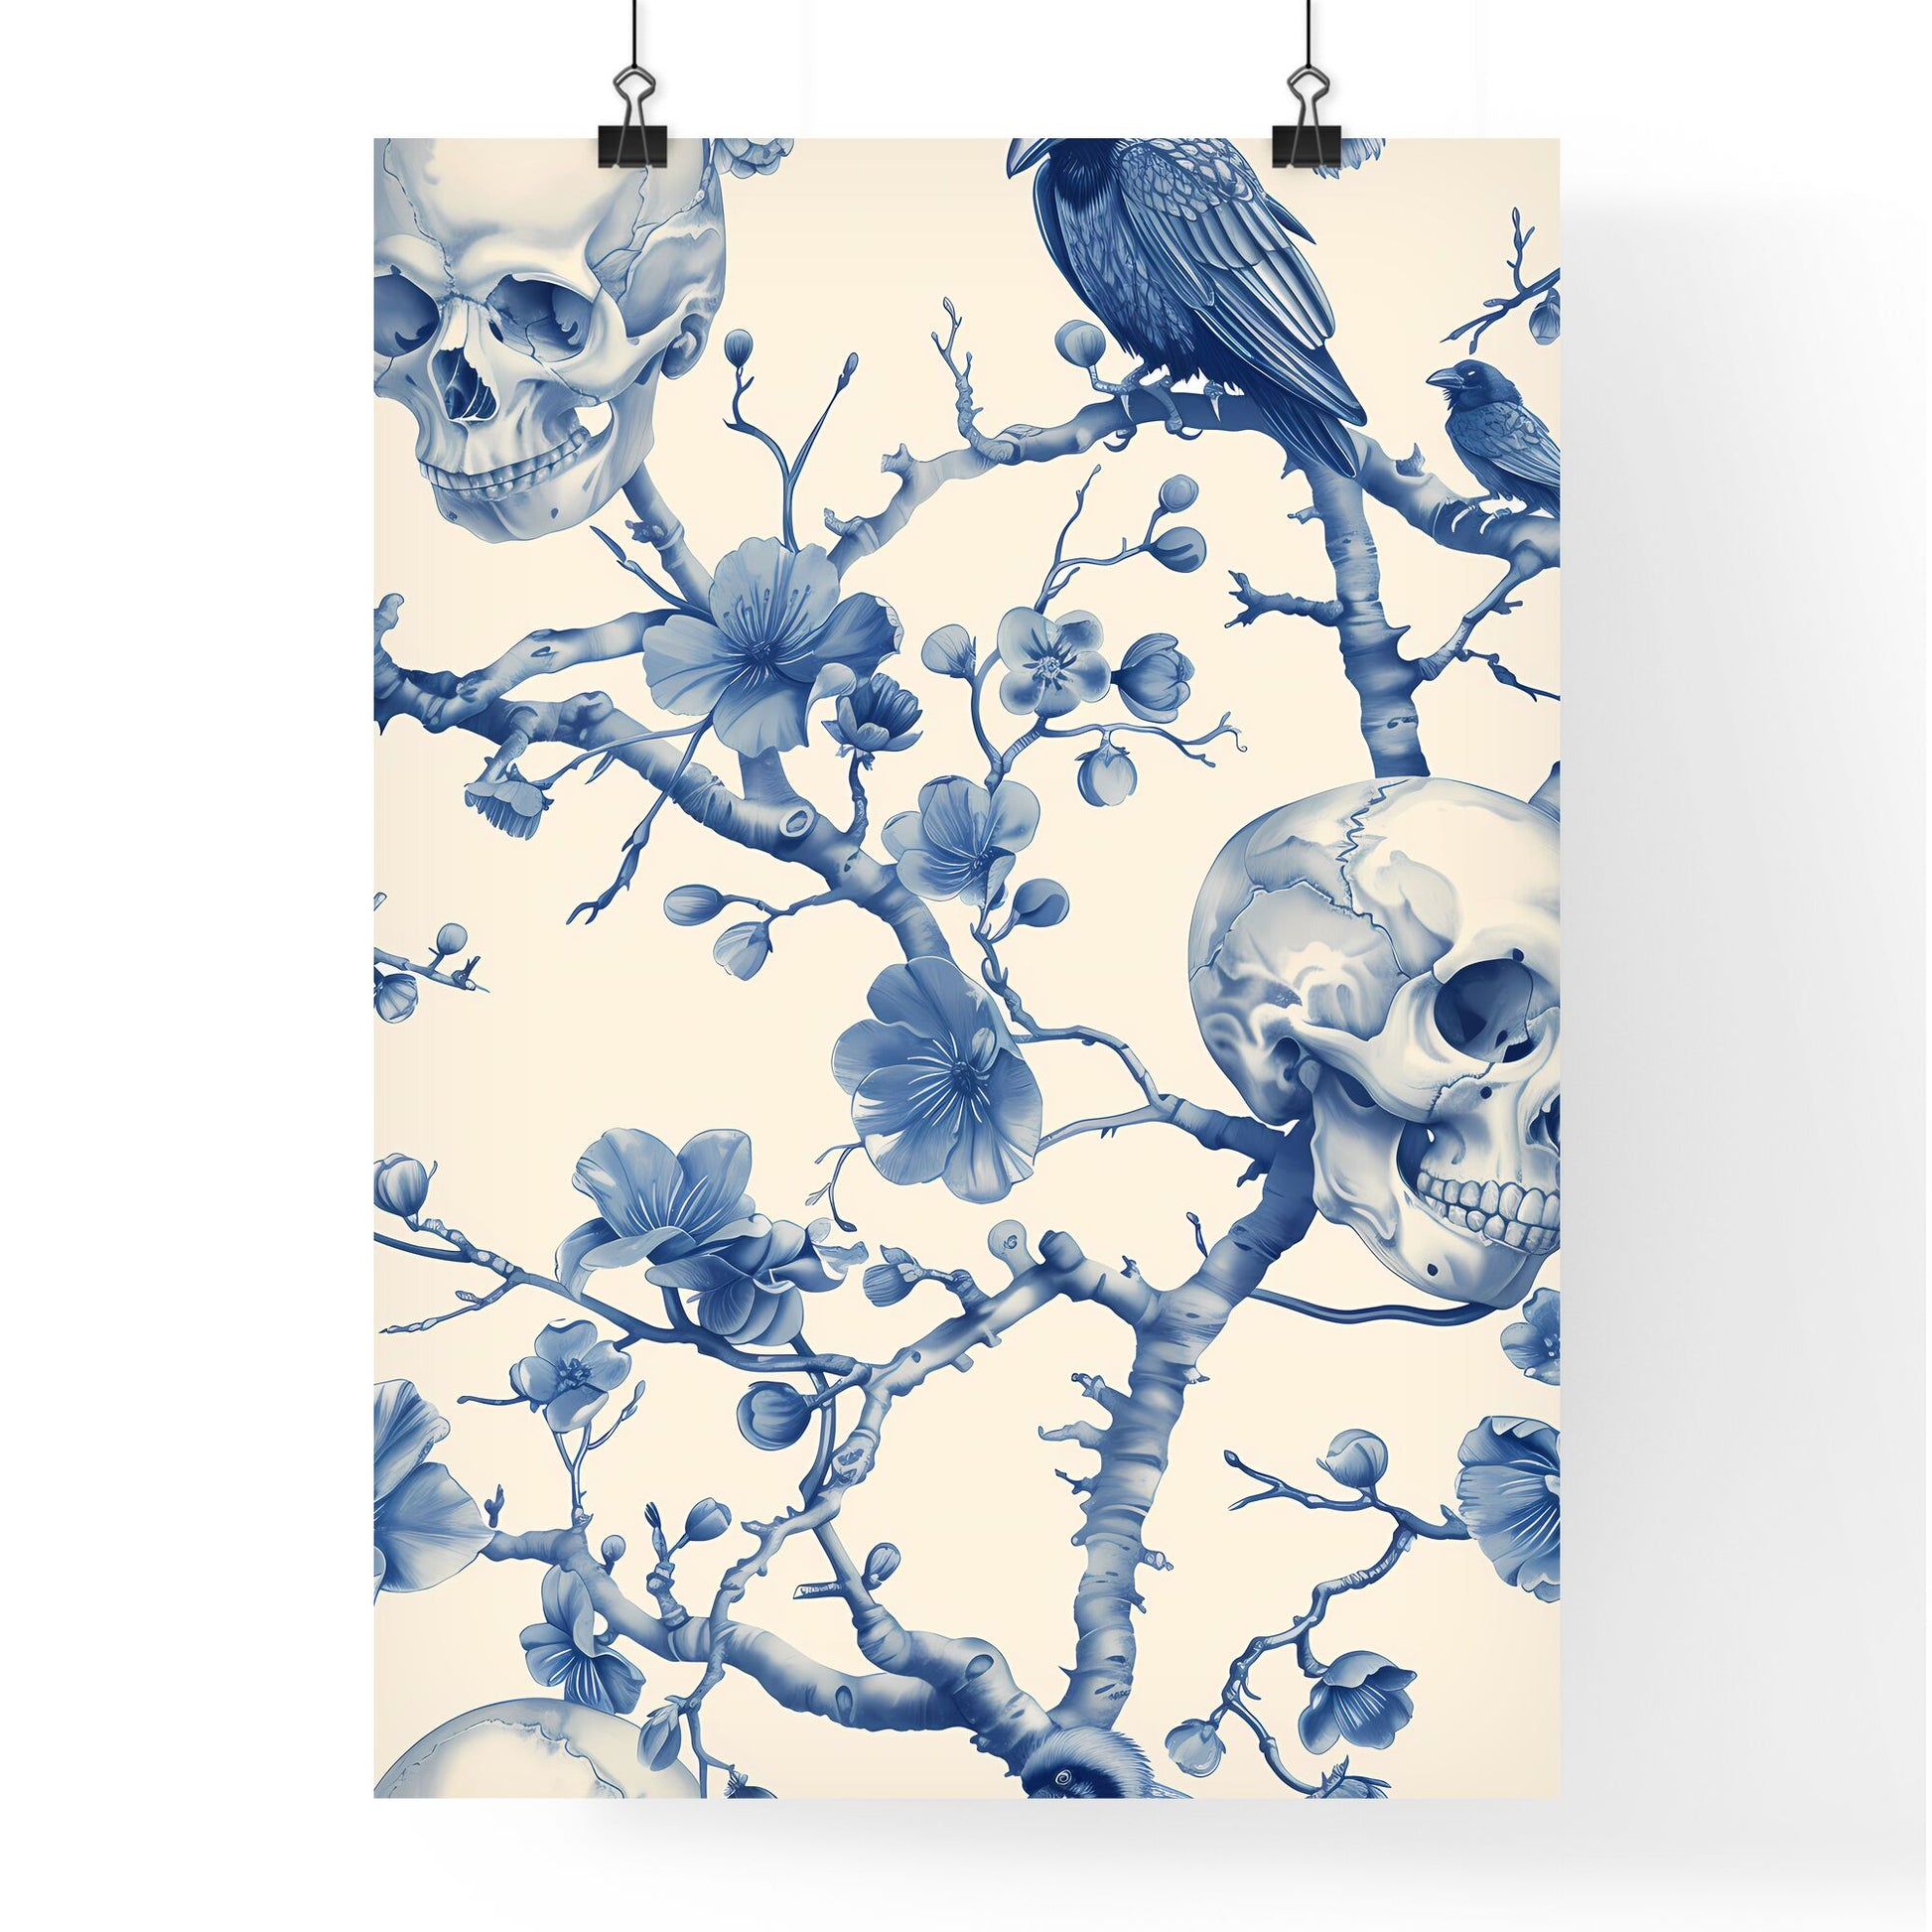 18th-century Chinoiserie Skull and Raven Wallpaper Motif in Vibrant Blue and White Default Title